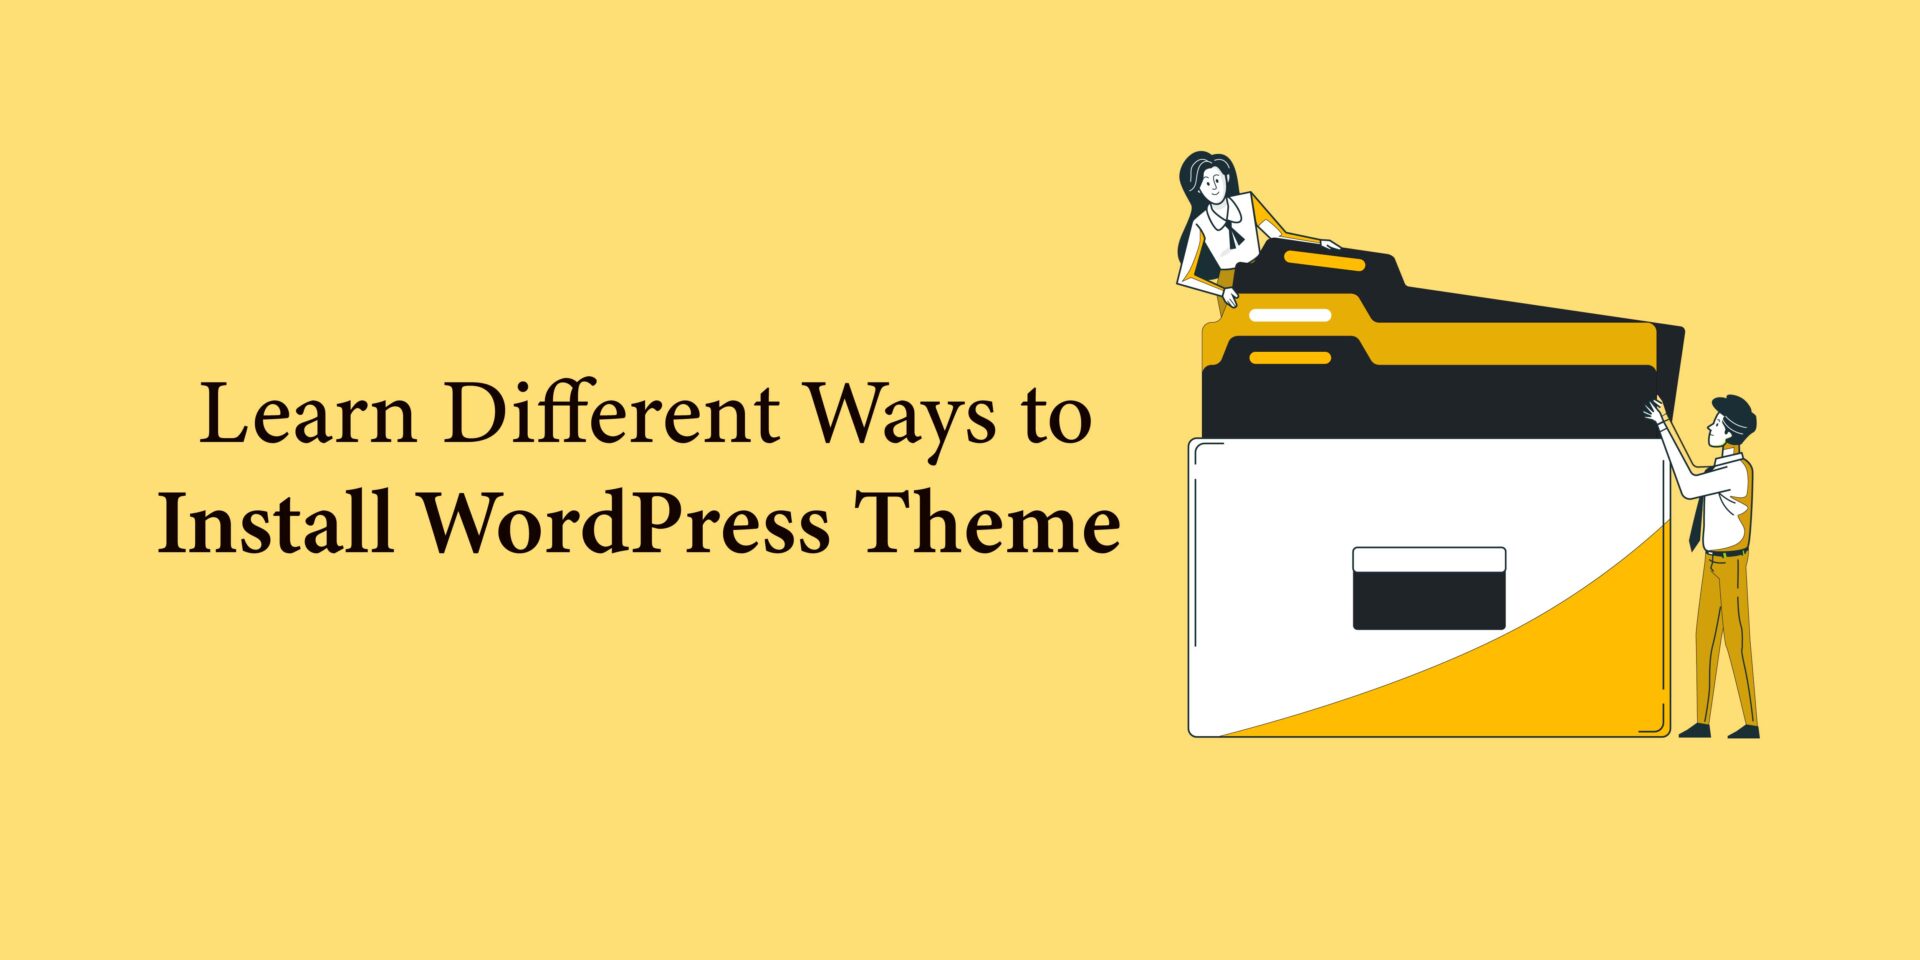 How to Install a WordPress Theme In 3 Different Ways